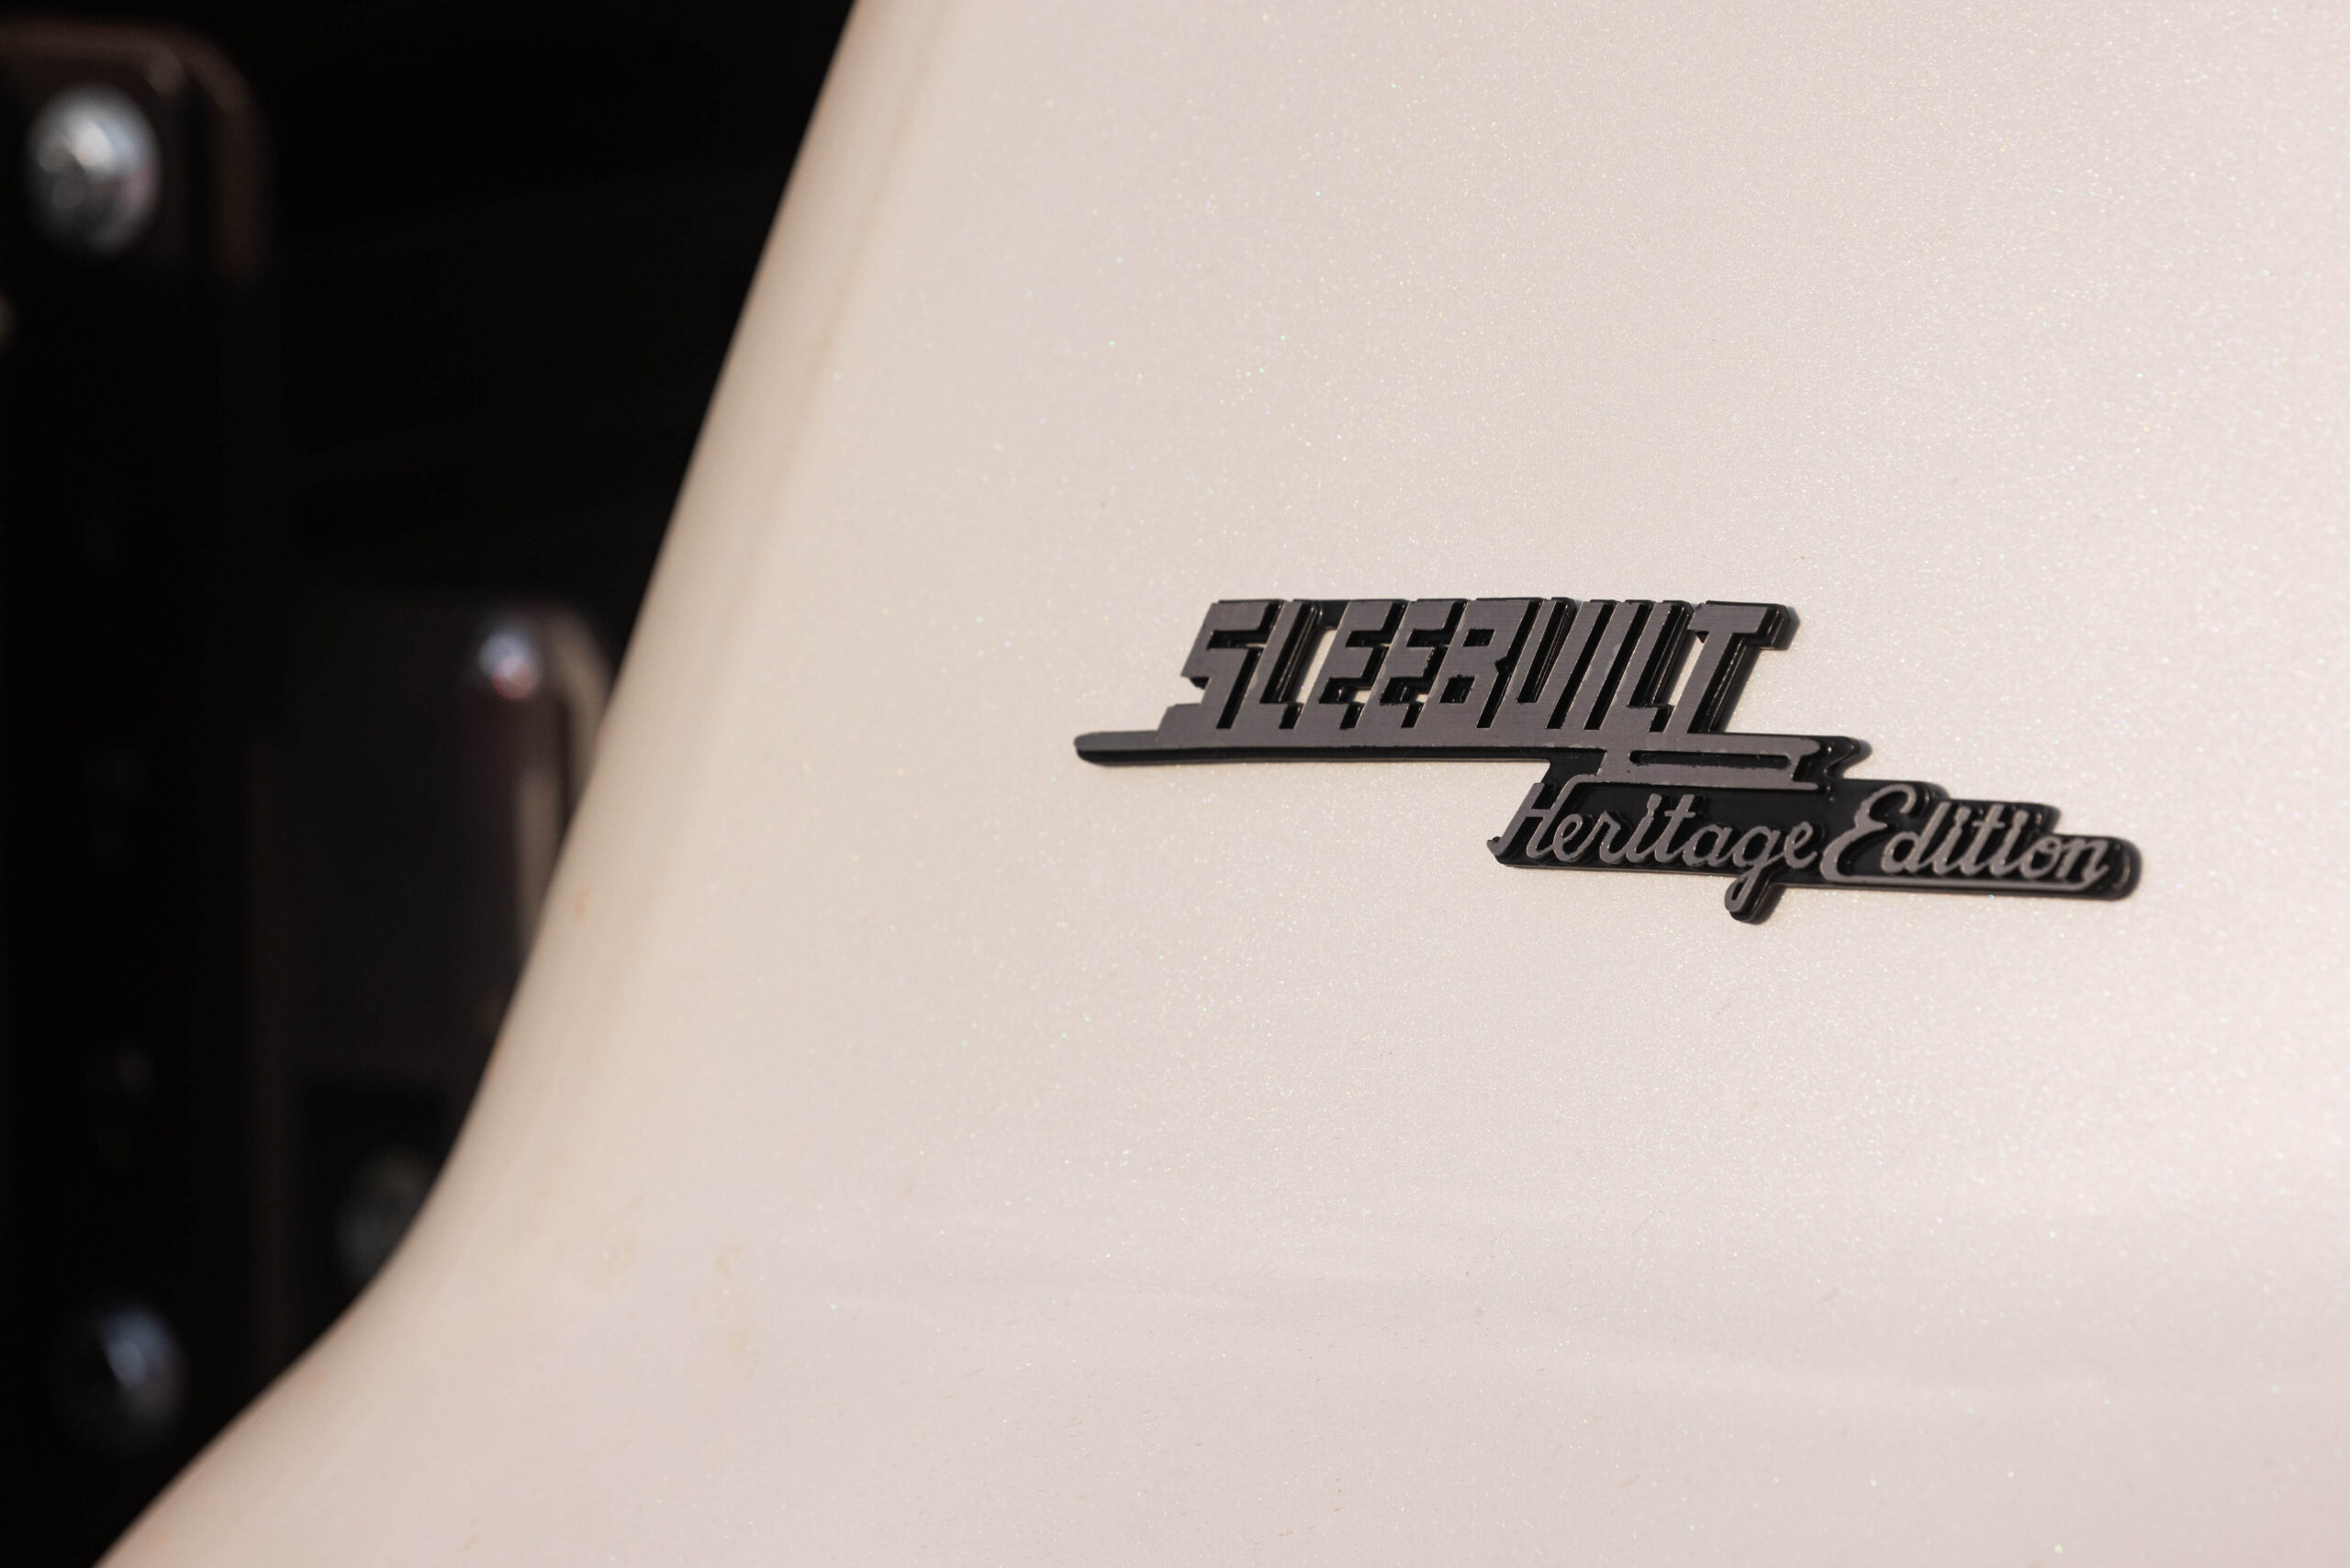 Image of the Sleebuilt Logo on the side of a Toyota